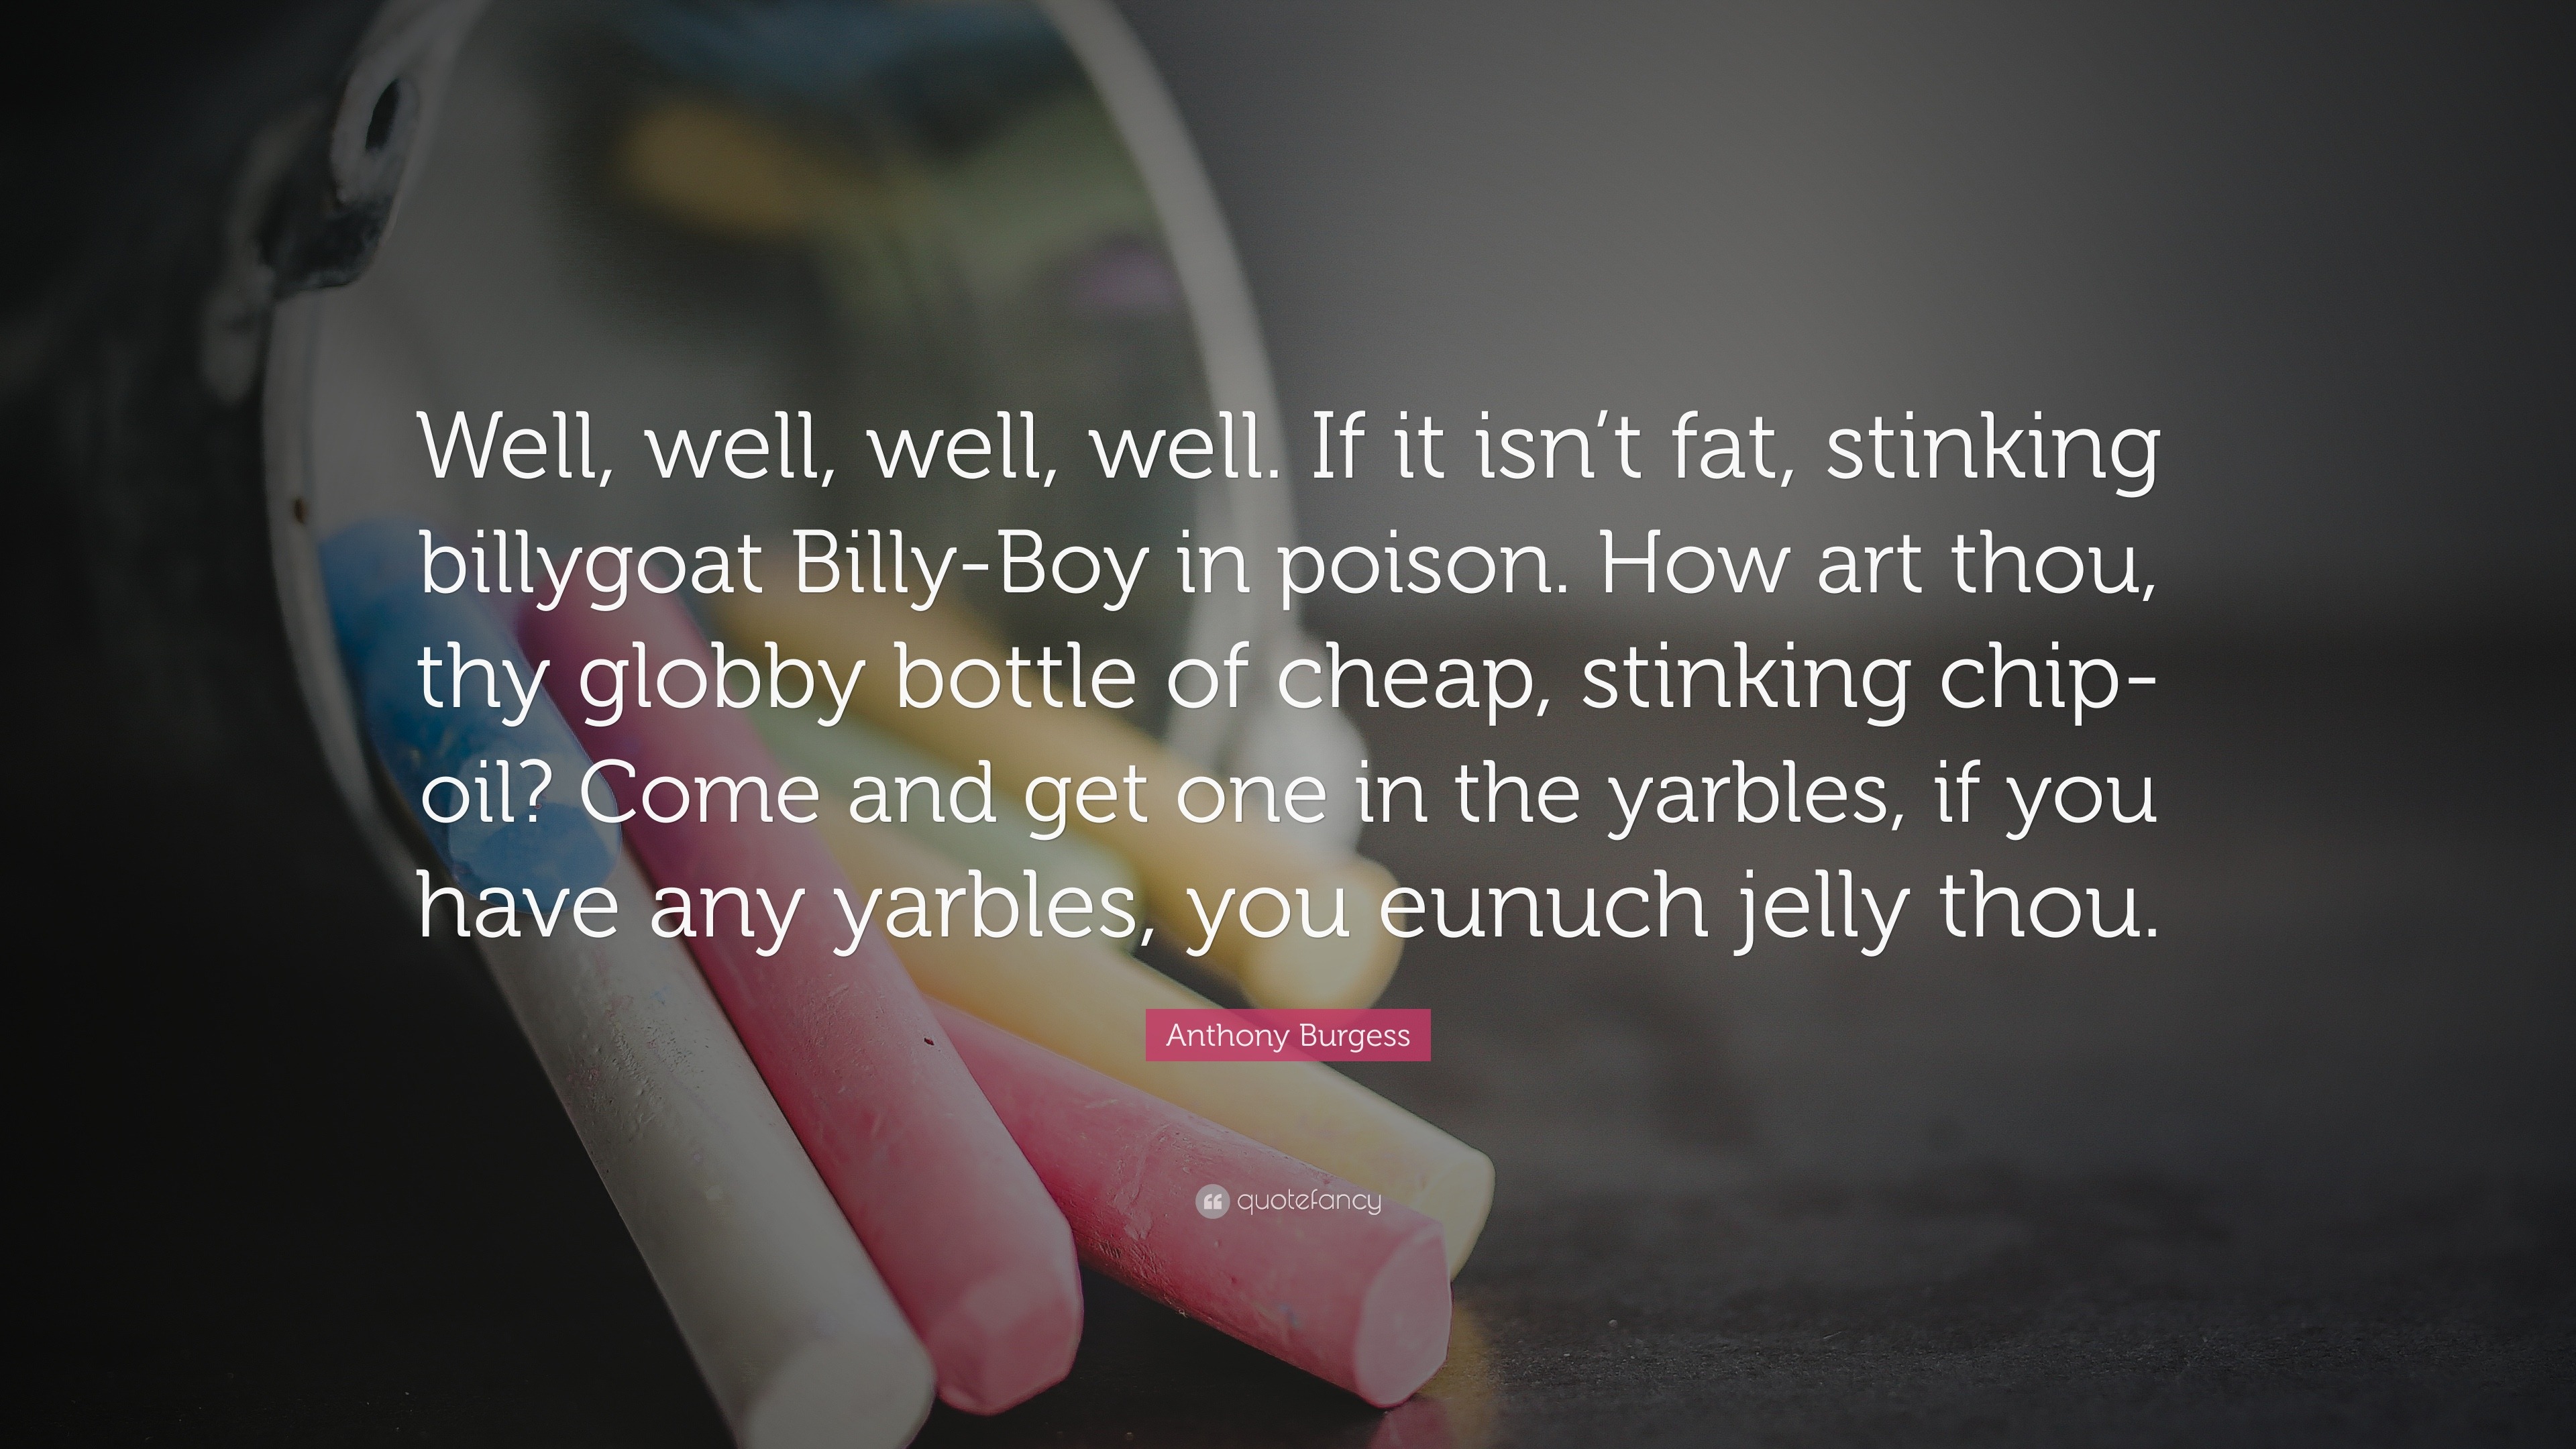 https://quotefancy.com/media/wallpaper/3840x2160/351732-Anthony-Burgess-Quote-Well-well-well-well-If-it-isn-t-fat-stinking.jpg